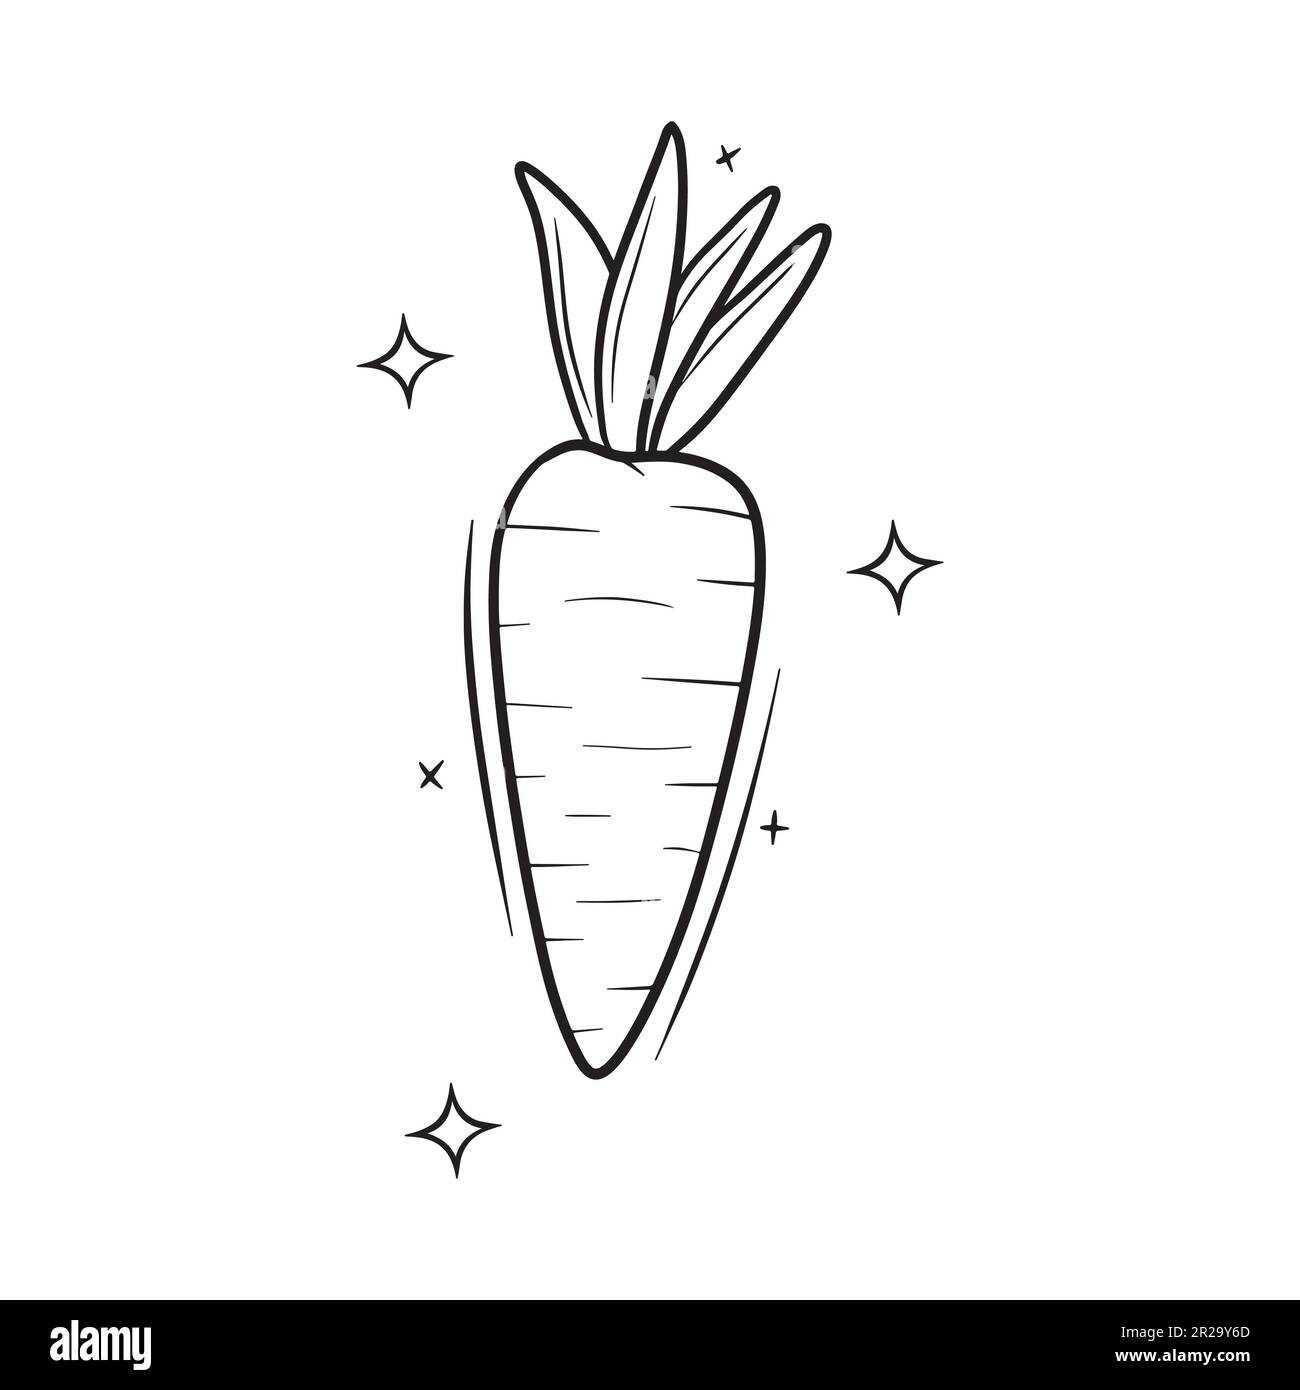 Hand Drawn Carrot.  Doodle Vector Sketch Illustration Stock Vector